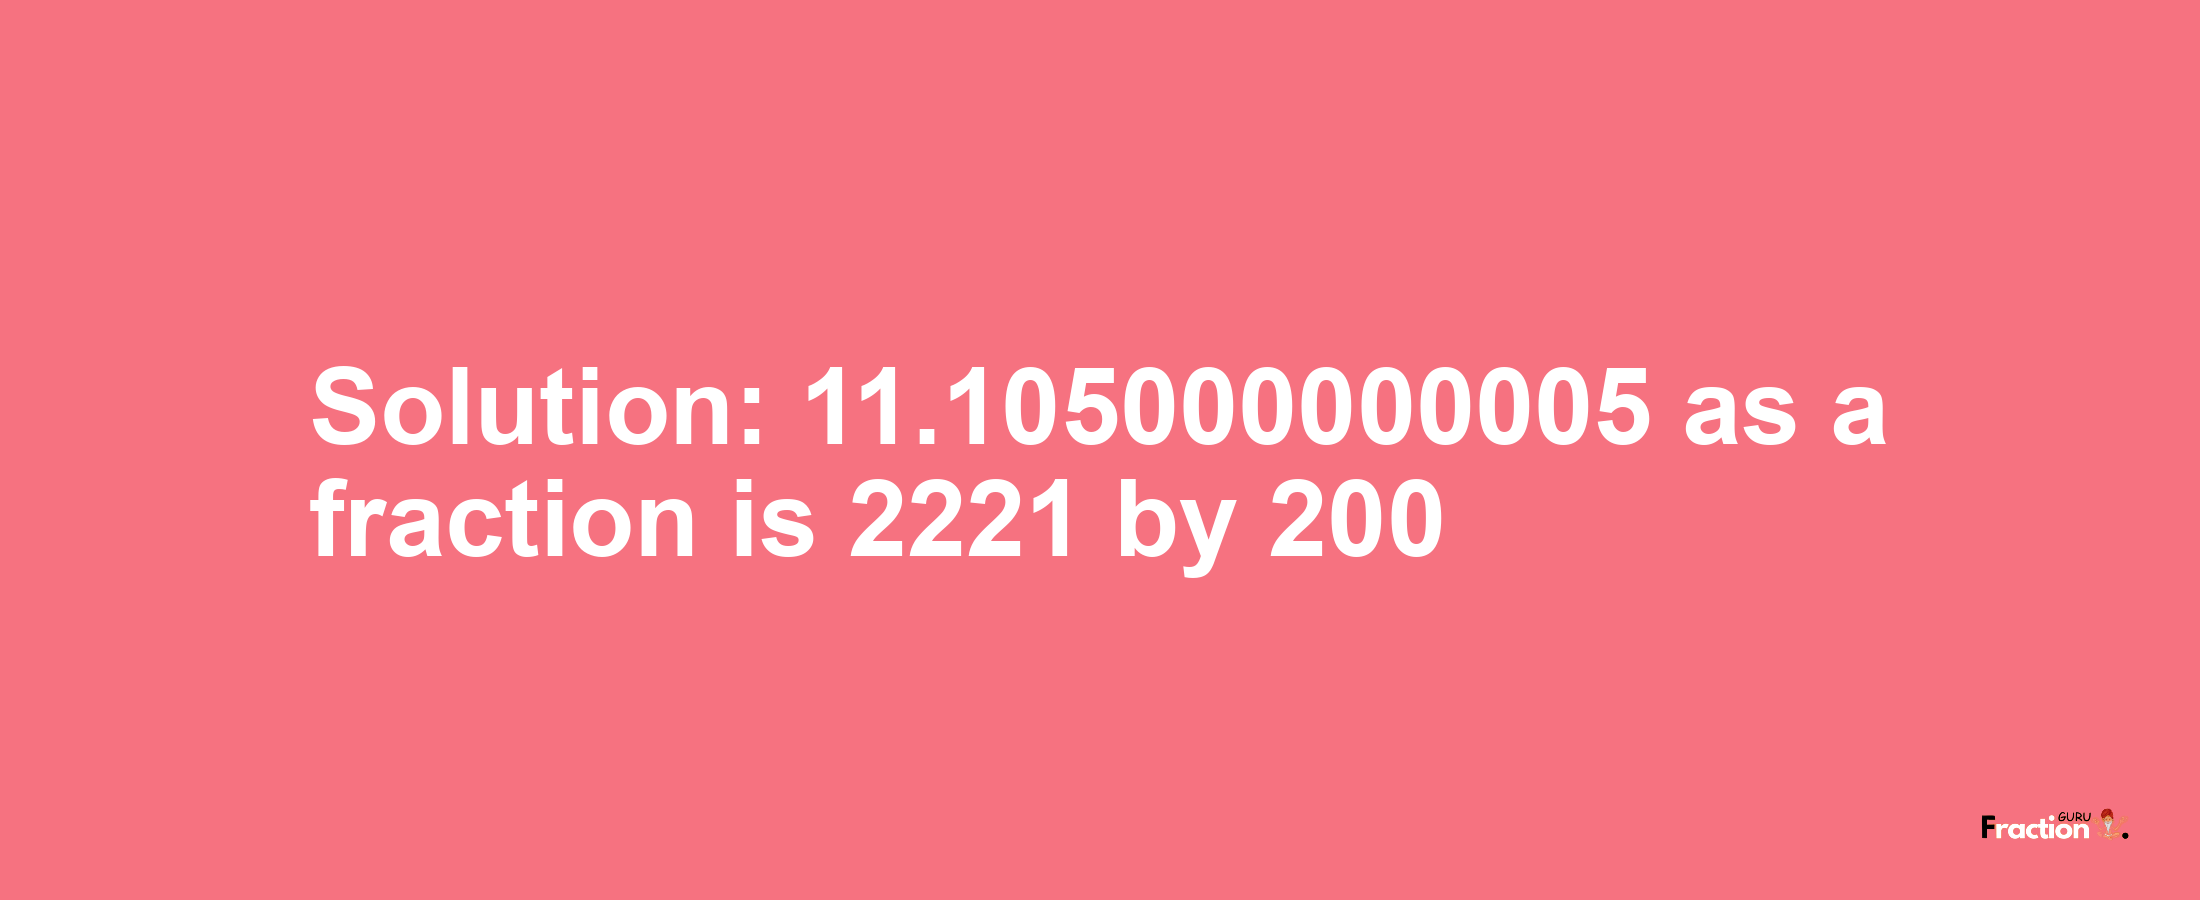 Solution:11.105000000005 as a fraction is 2221/200